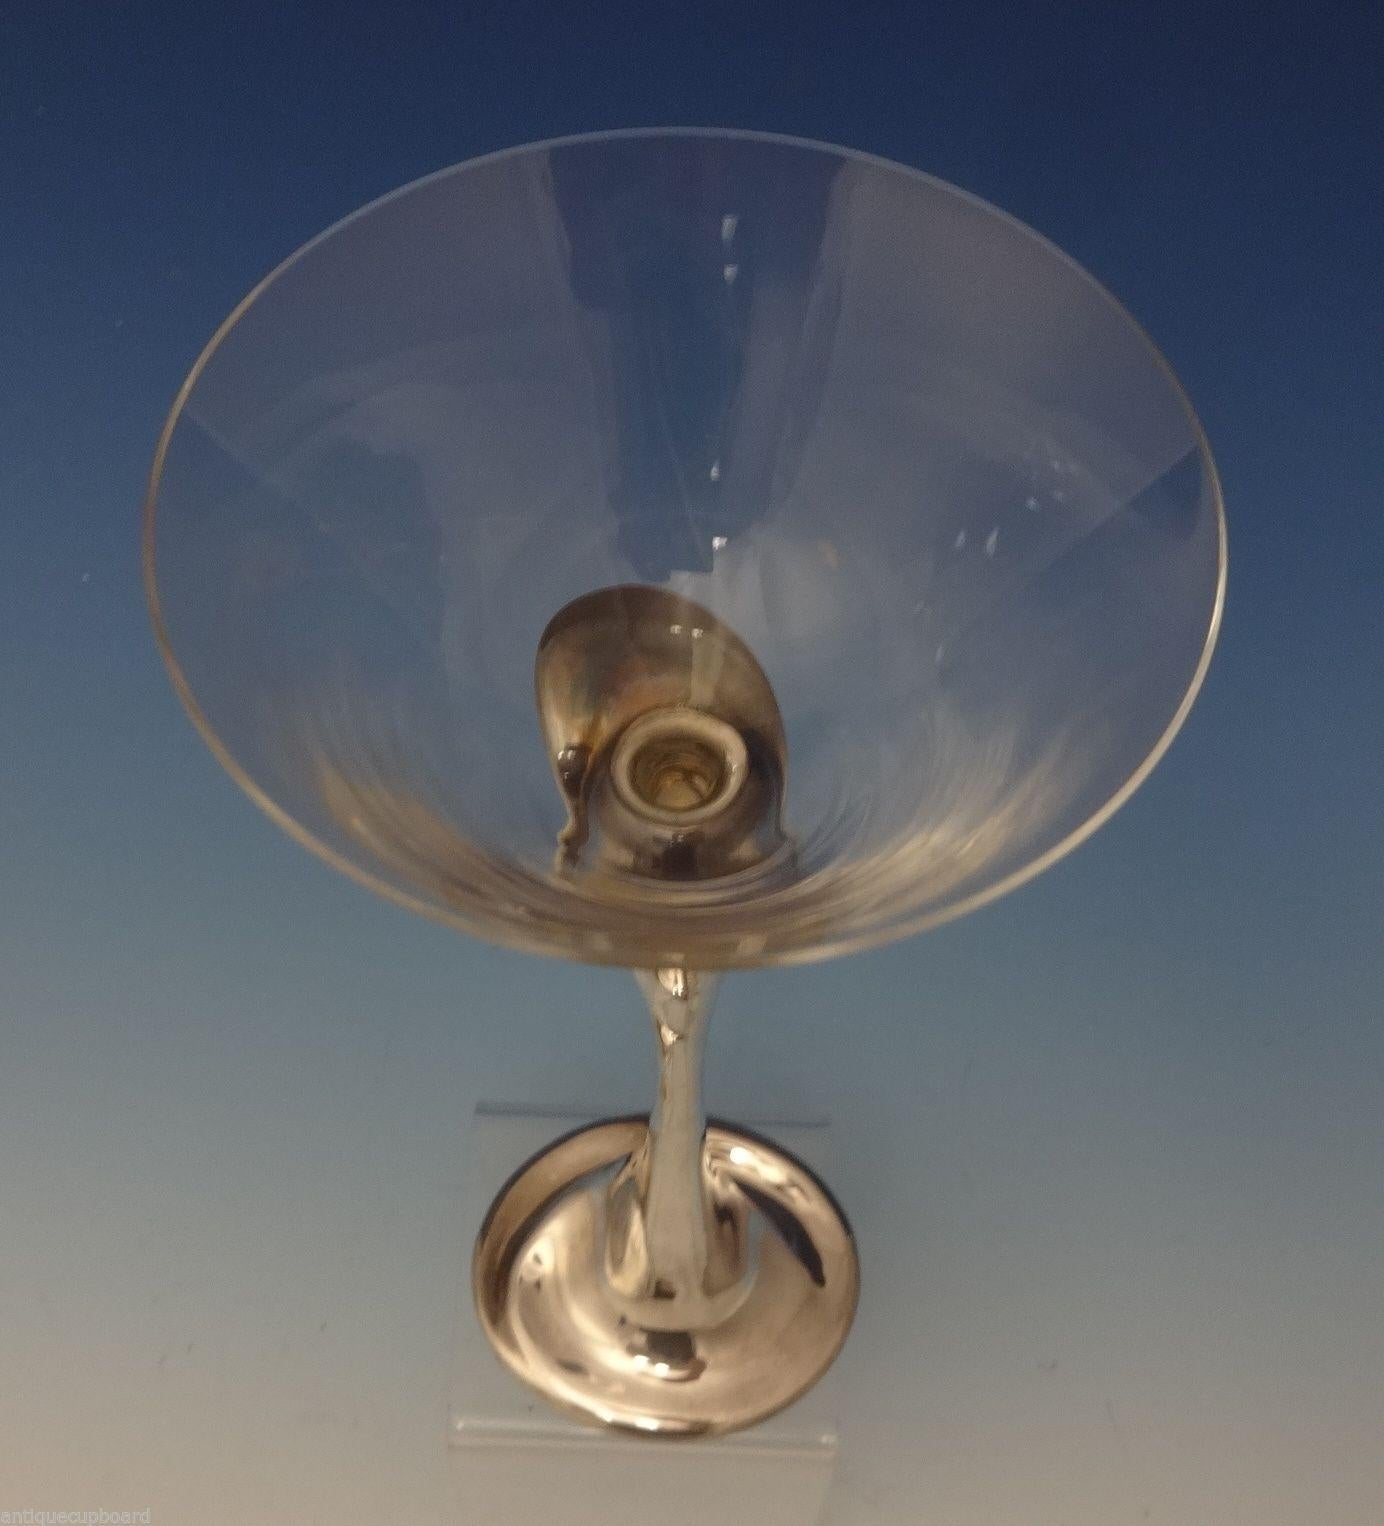 Tiffany & Co.
This elegant sterling silver martini glass was made by Tiffany & Co. and designed by Elsa Peretti. The piece has a glass/crystal top and a sterling stem. It measures a very large 9 1/4 tall, 4 wide, and it weighs 7.0 ozt (with the